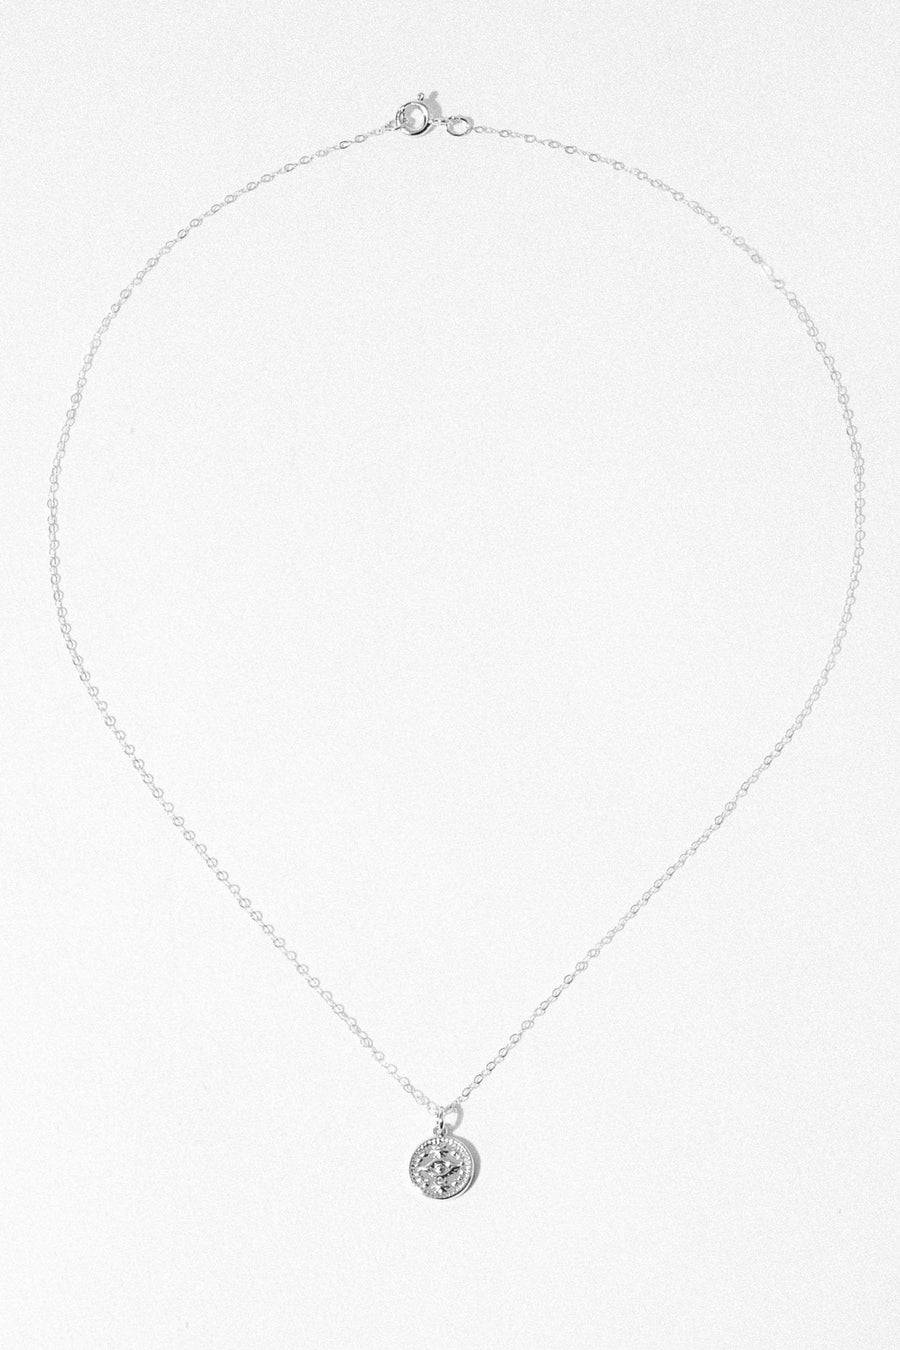 Aimvogue Jewelry 16 Inches / Silver Delicate Protection Necklace